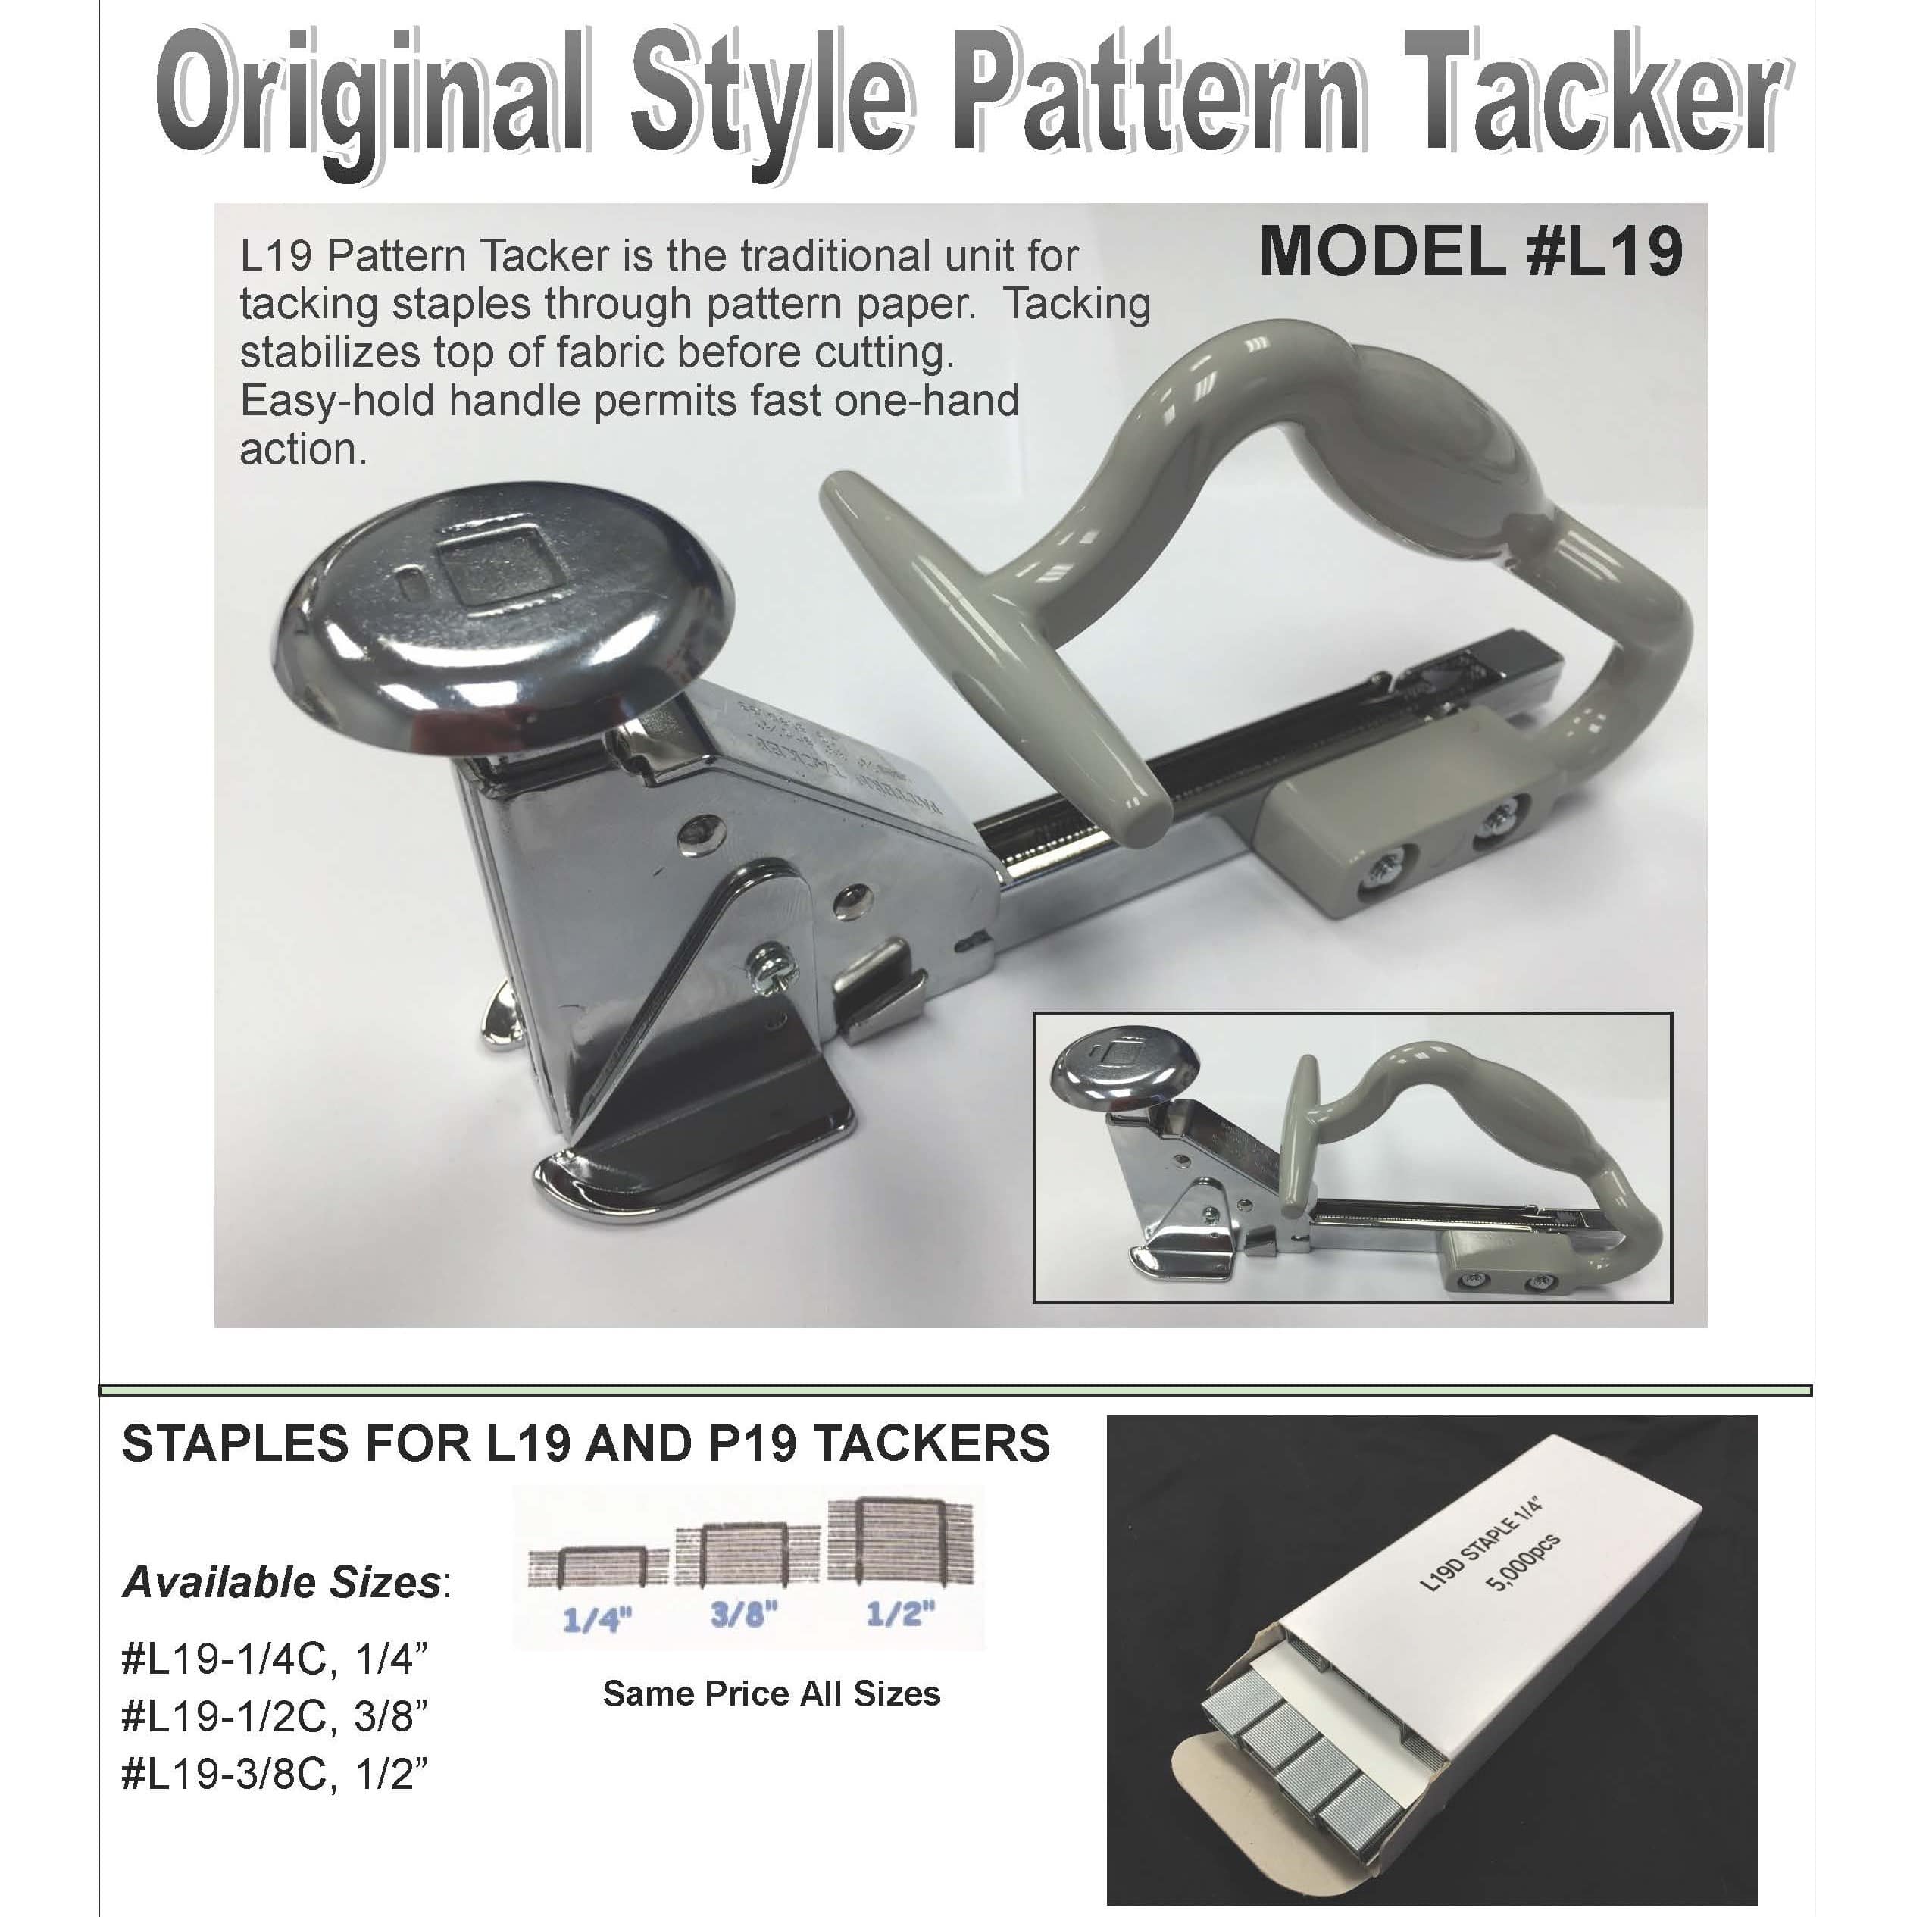 L19 ORIGINAL STYLE PATTERN TACKER
STAPLES FOR P19 and L19